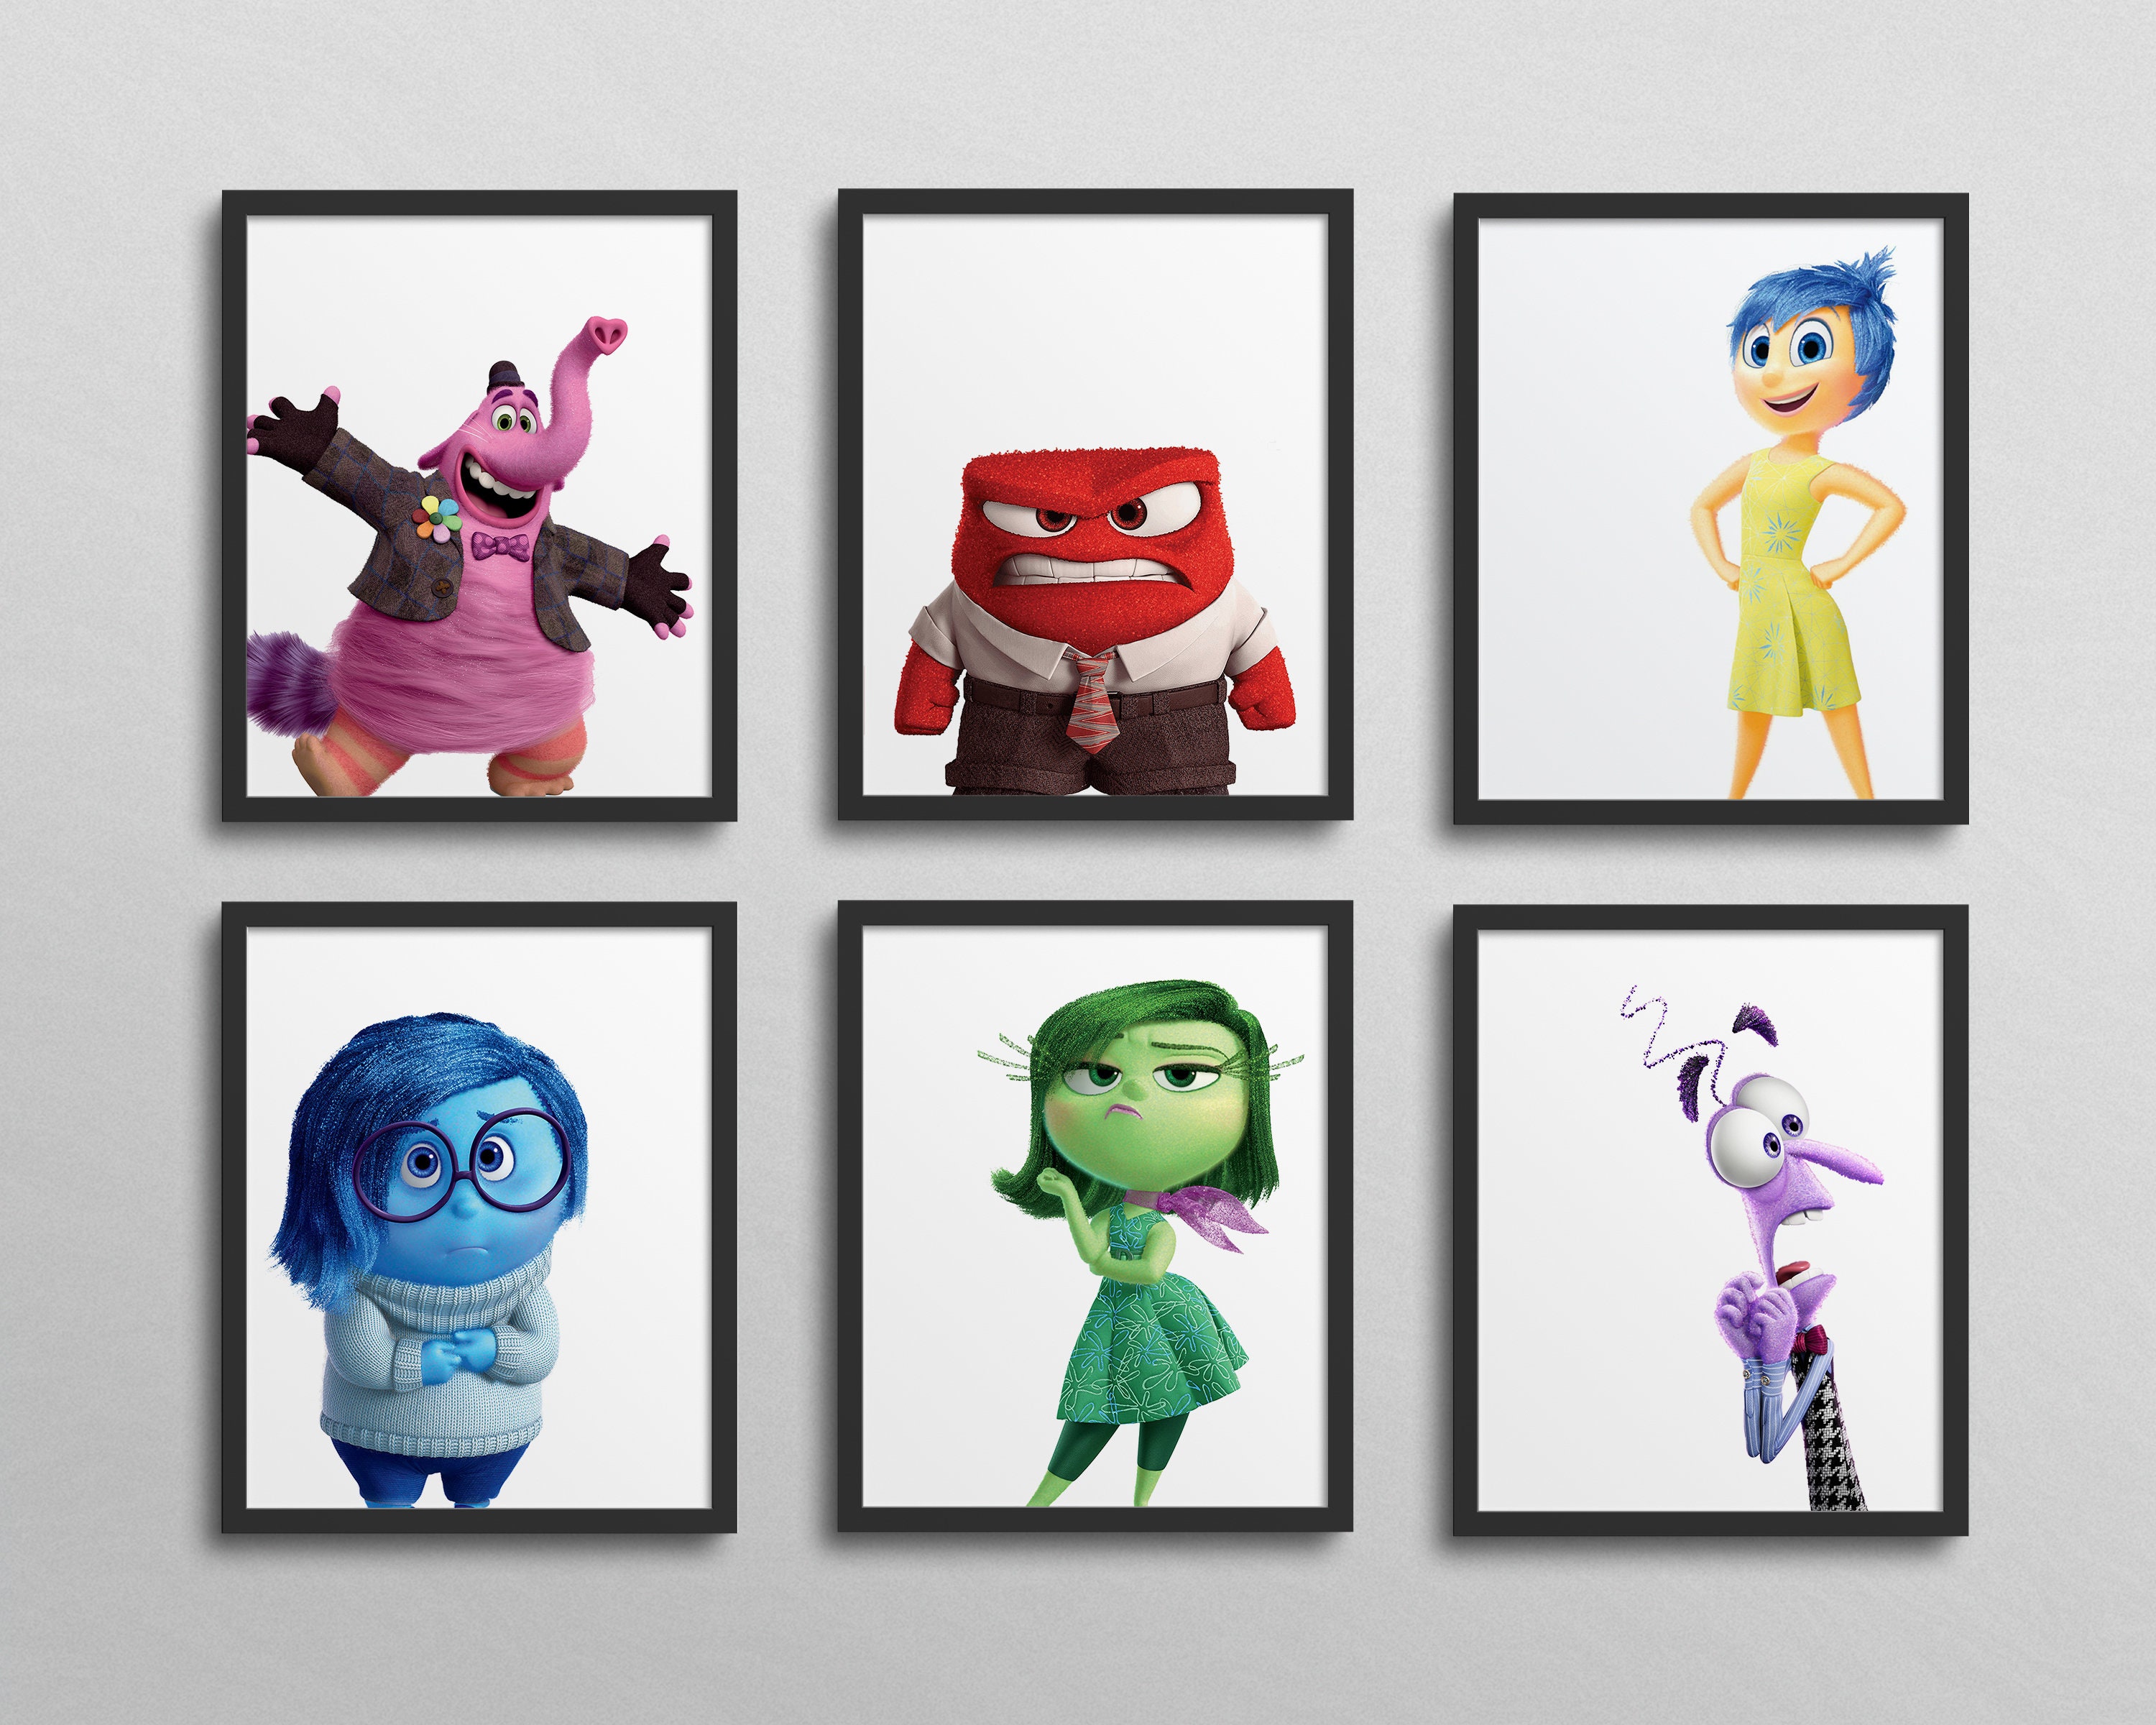 Inside Out Picture for Classroom / Therapy Use - Great Inside Out Clipart